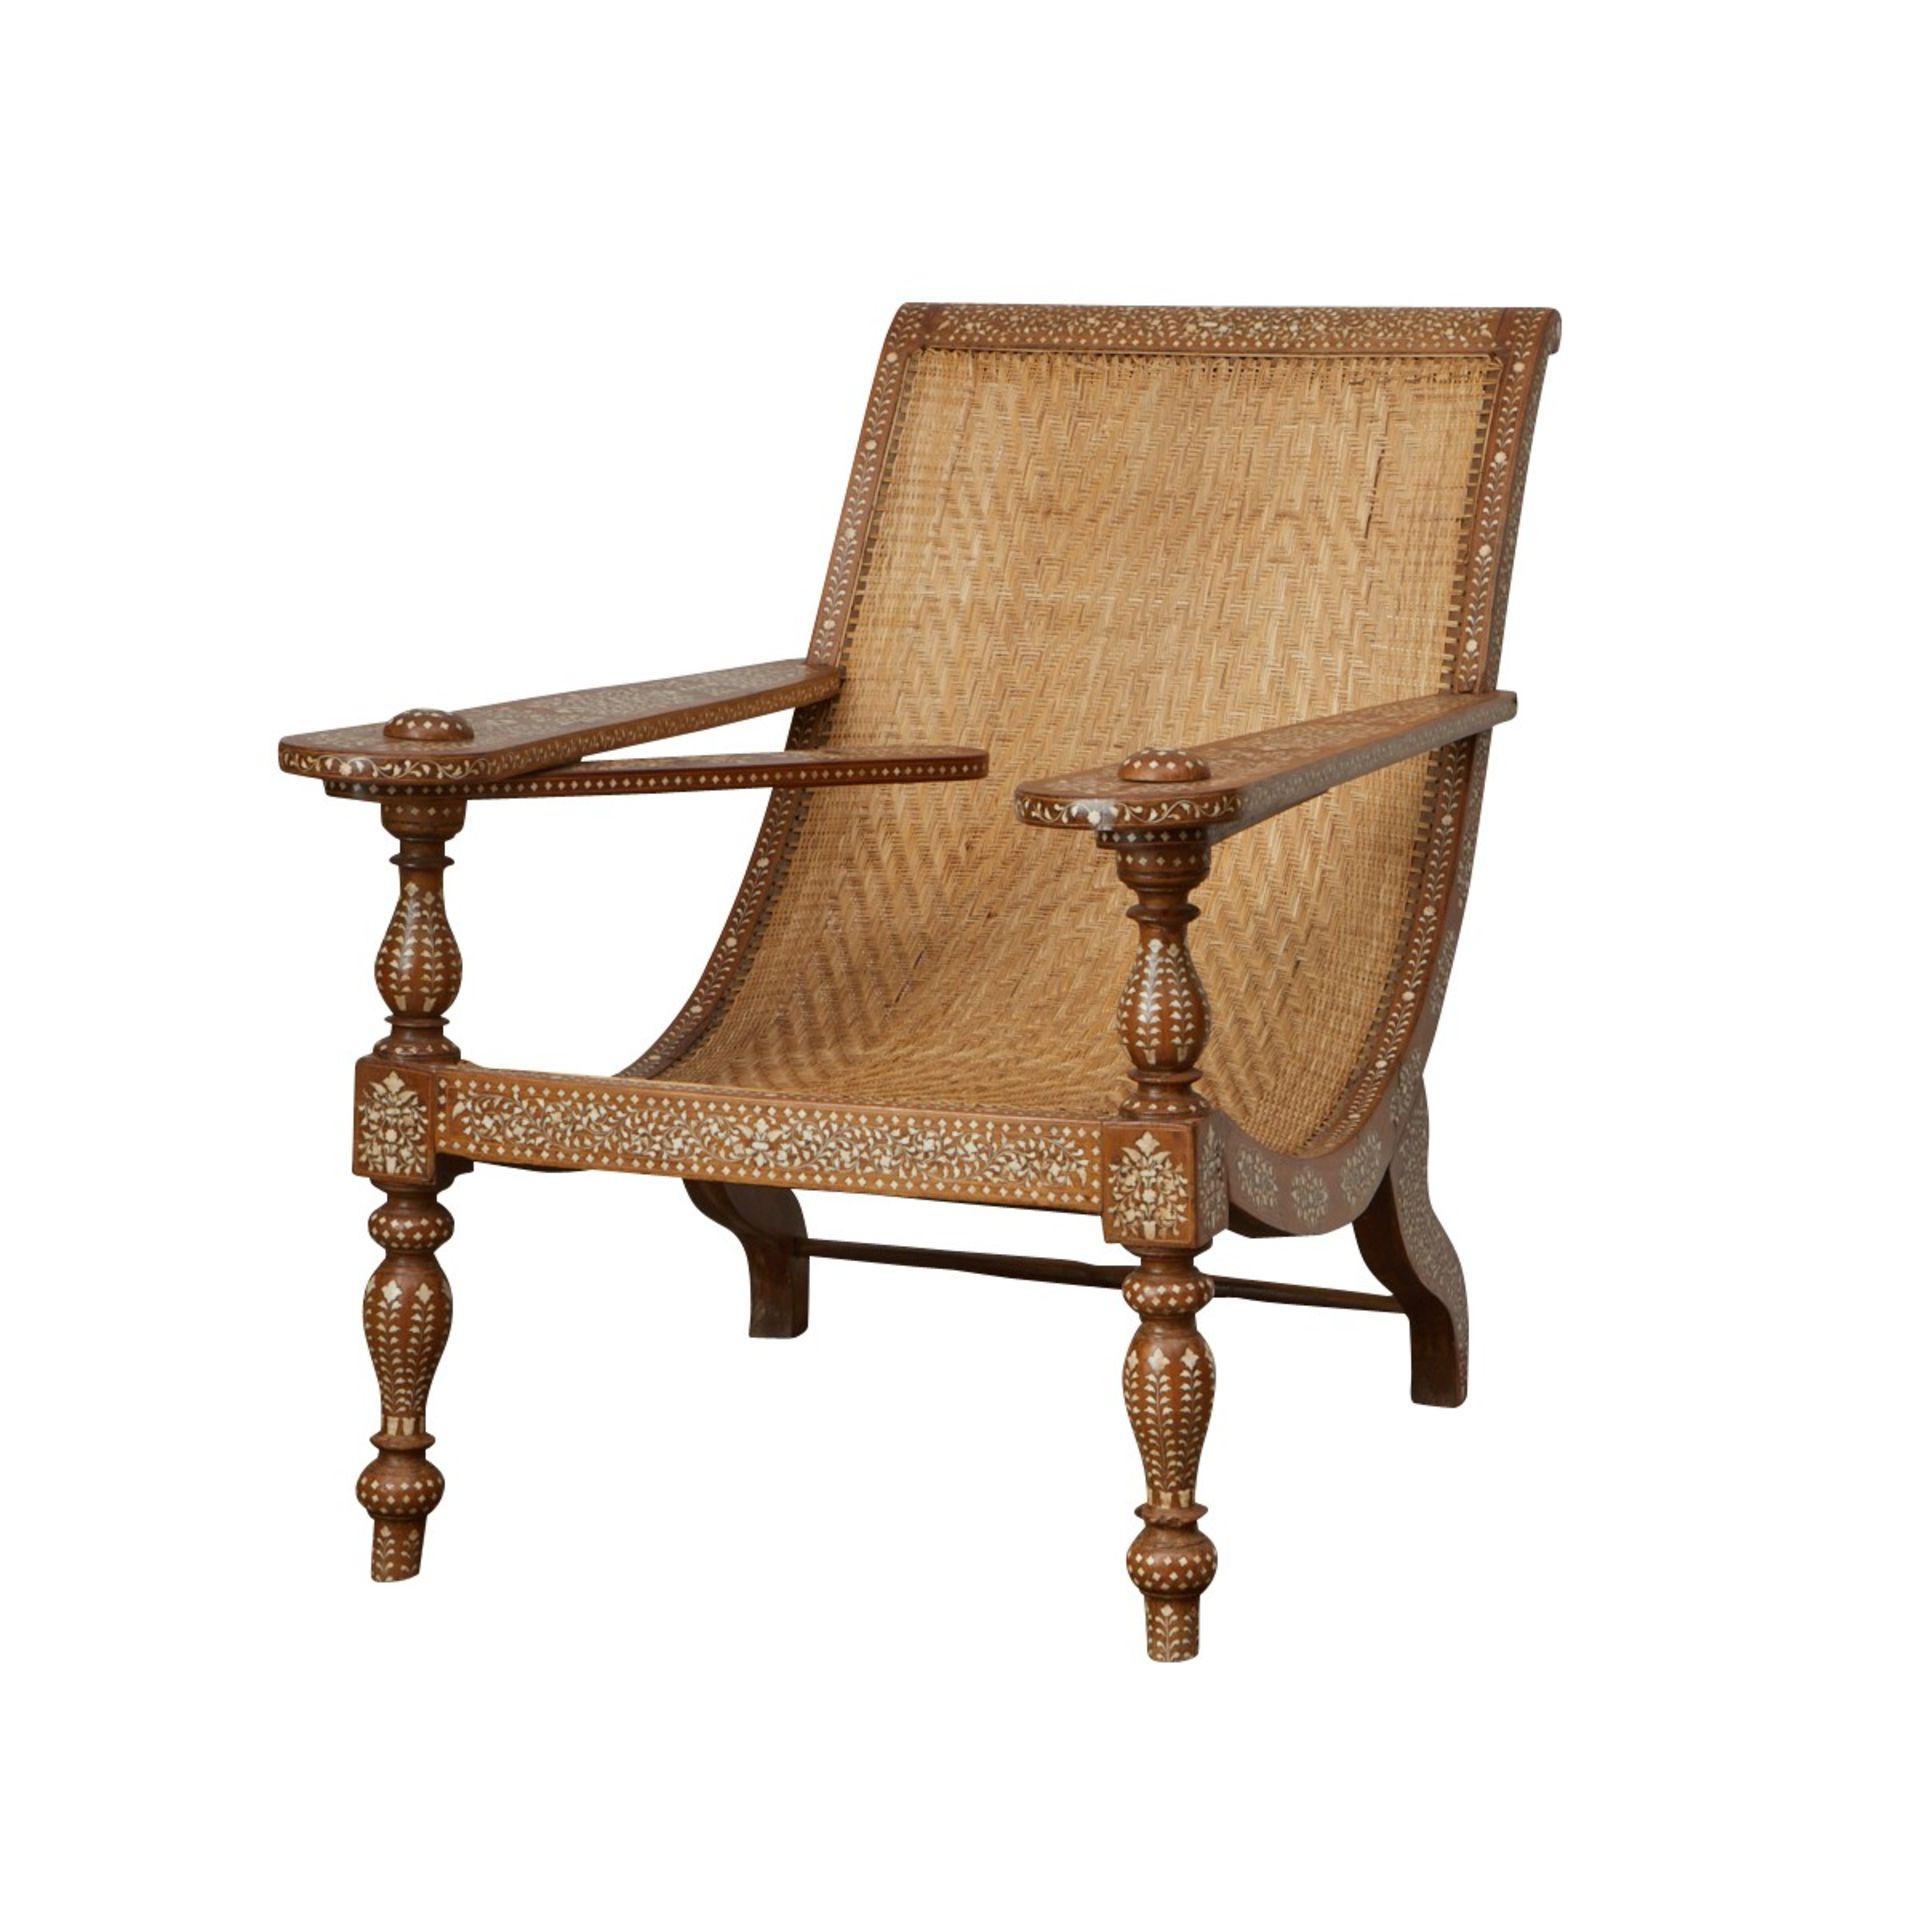 Syrian Inlaid Mother of Pearl Plantation Chair - Image 9 of 16